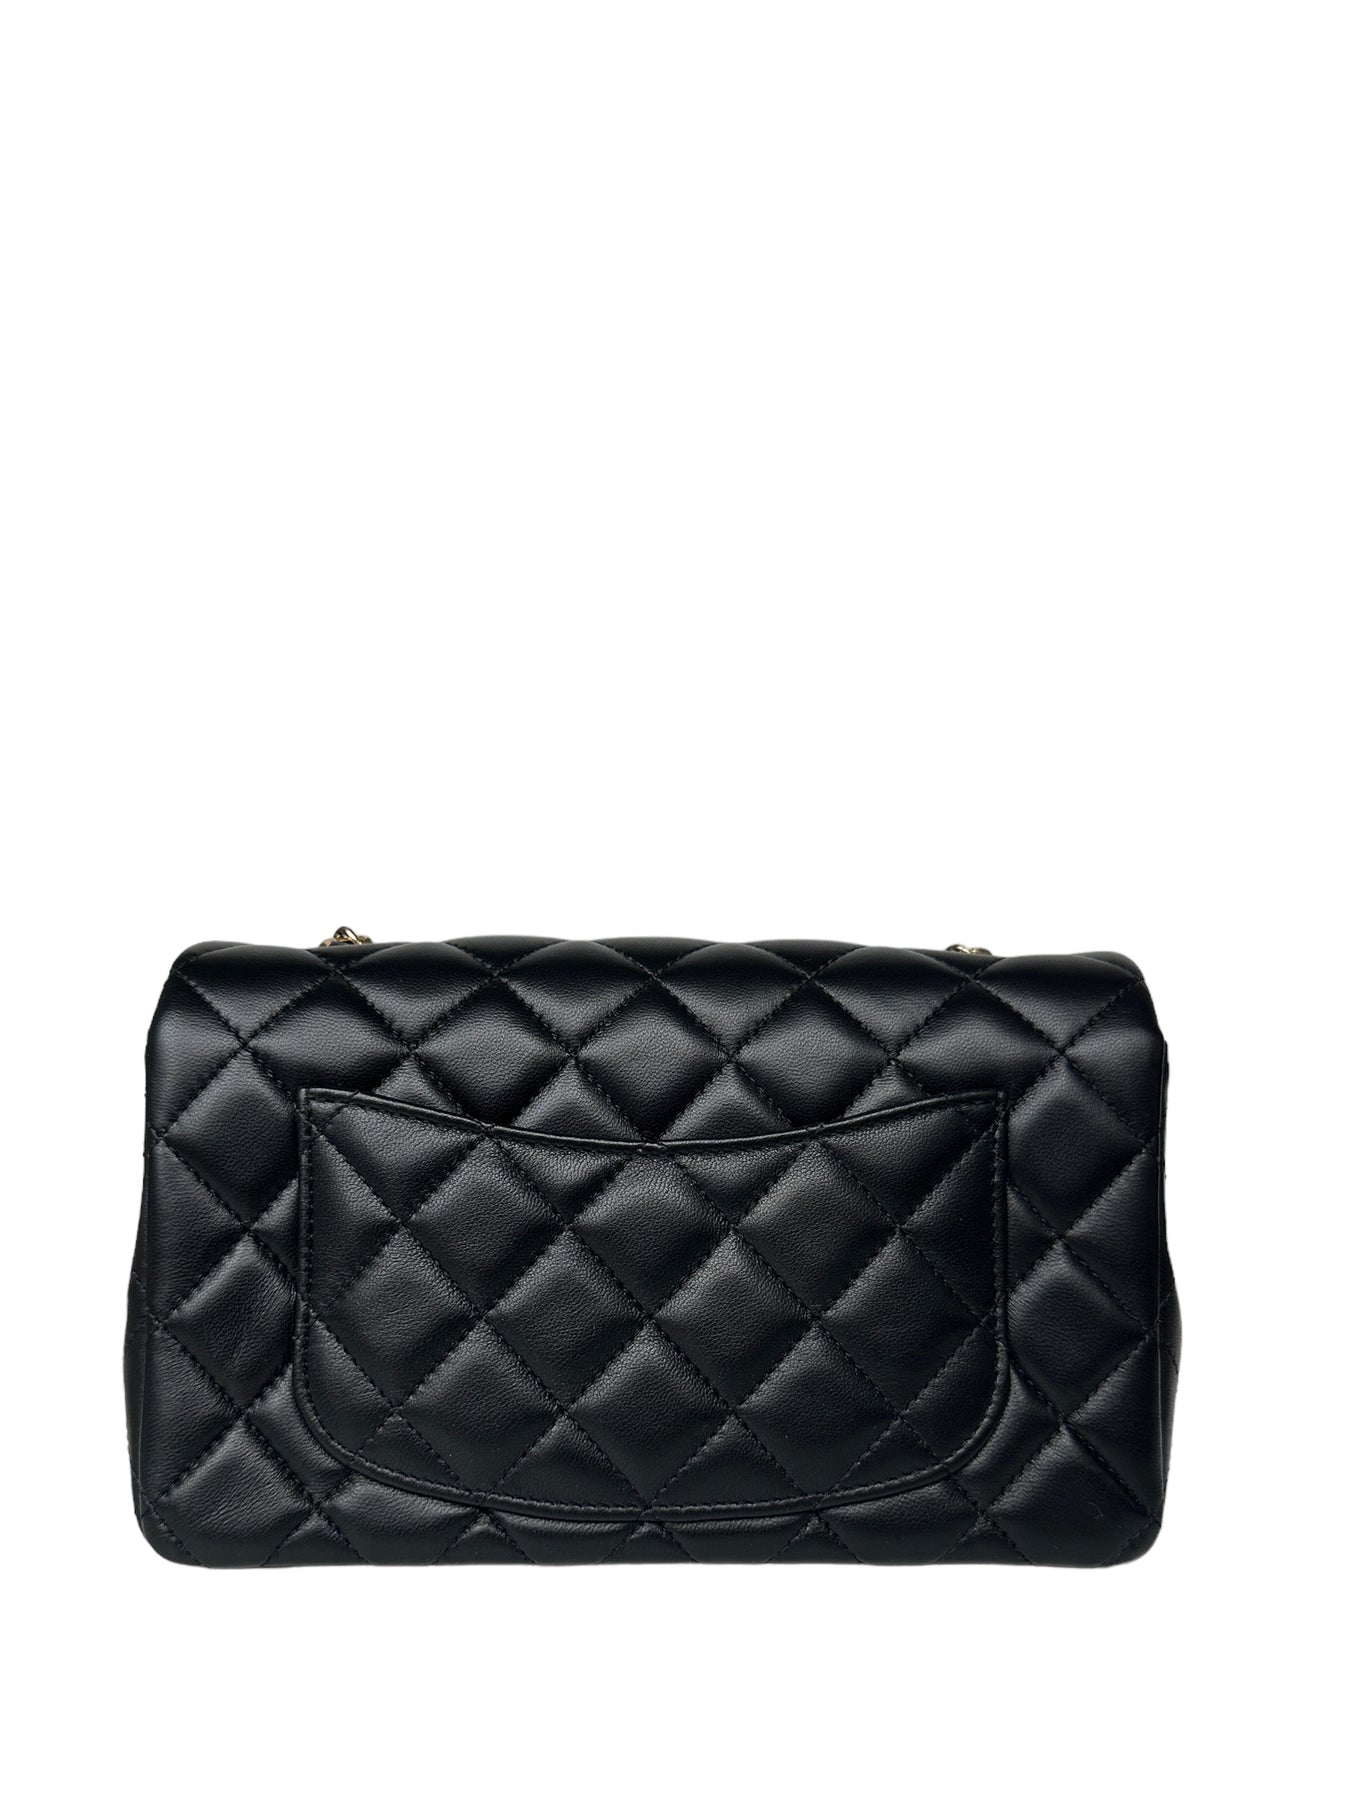 Chanel Black Lambskin Leather Quilted Rectangular Mini Flap Bag